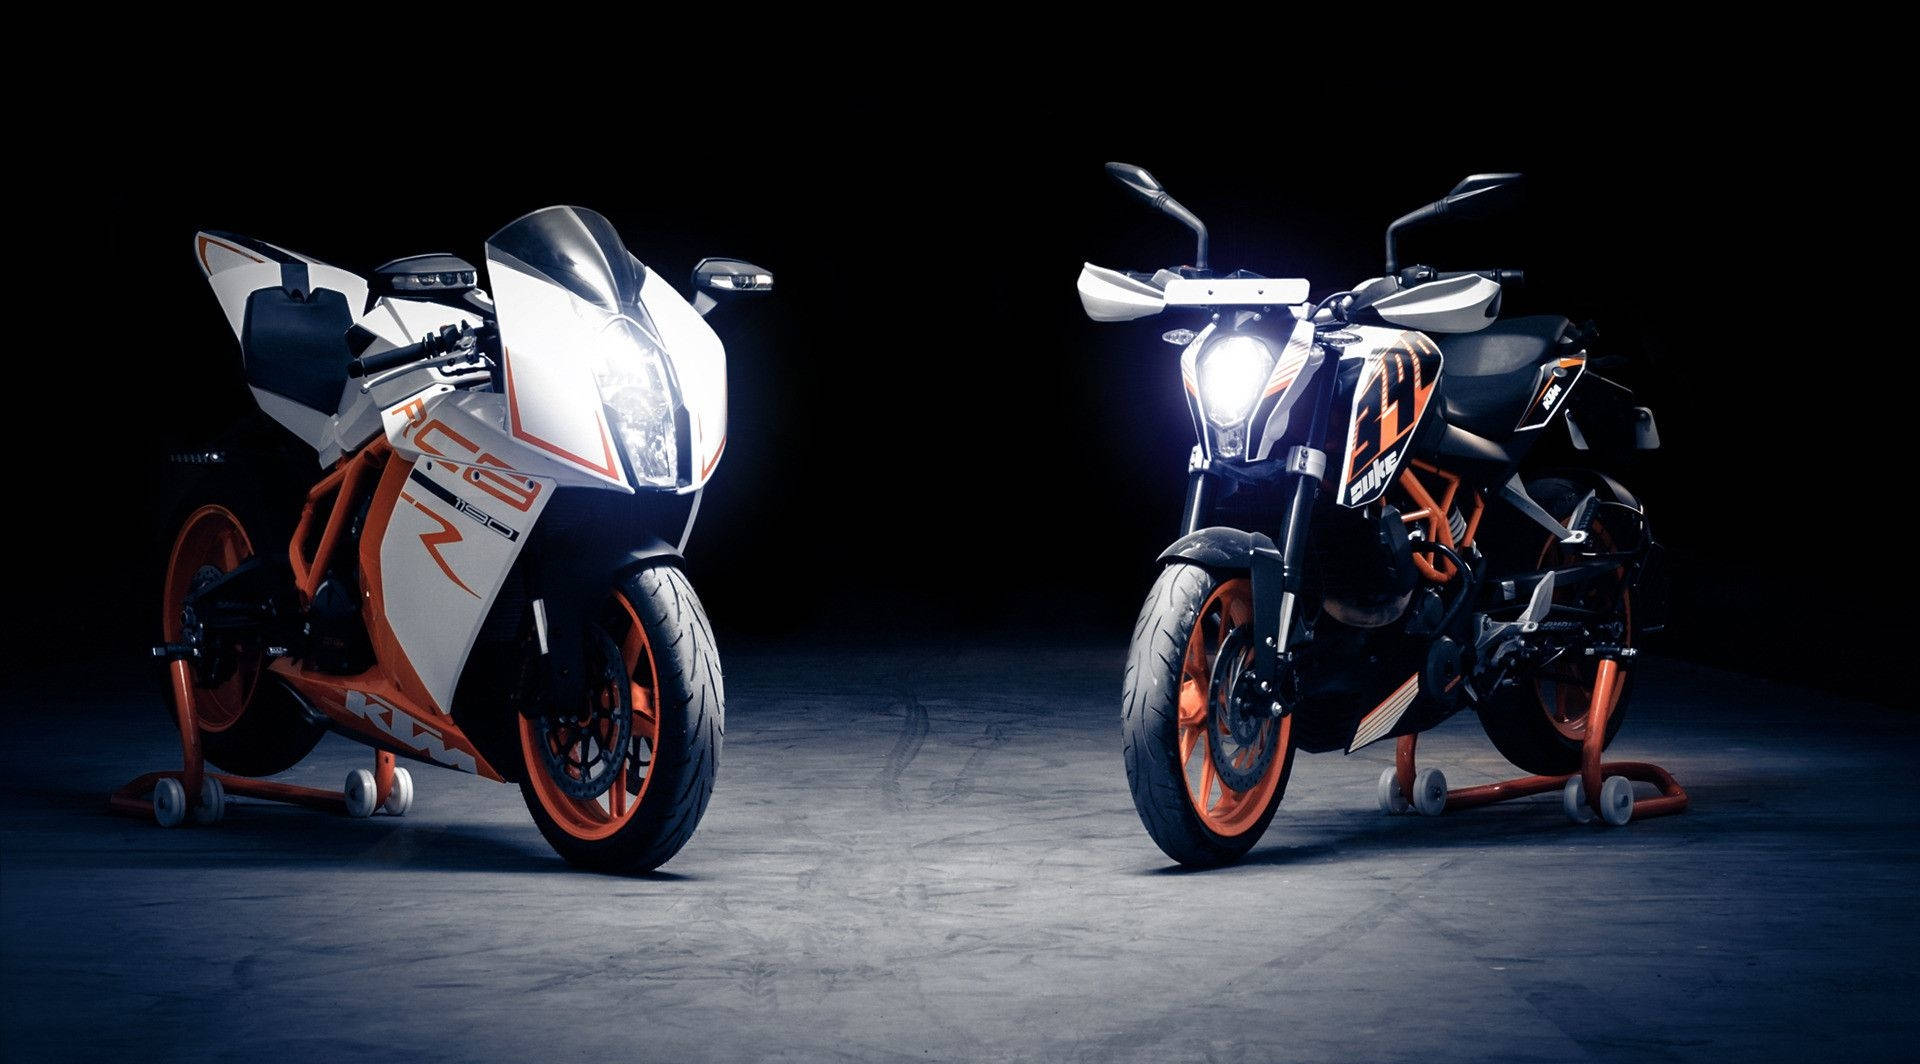 The Dynamic Duo - KTM Duke 390 & KTM 1190 RC8 in Raw Action Wallpaper